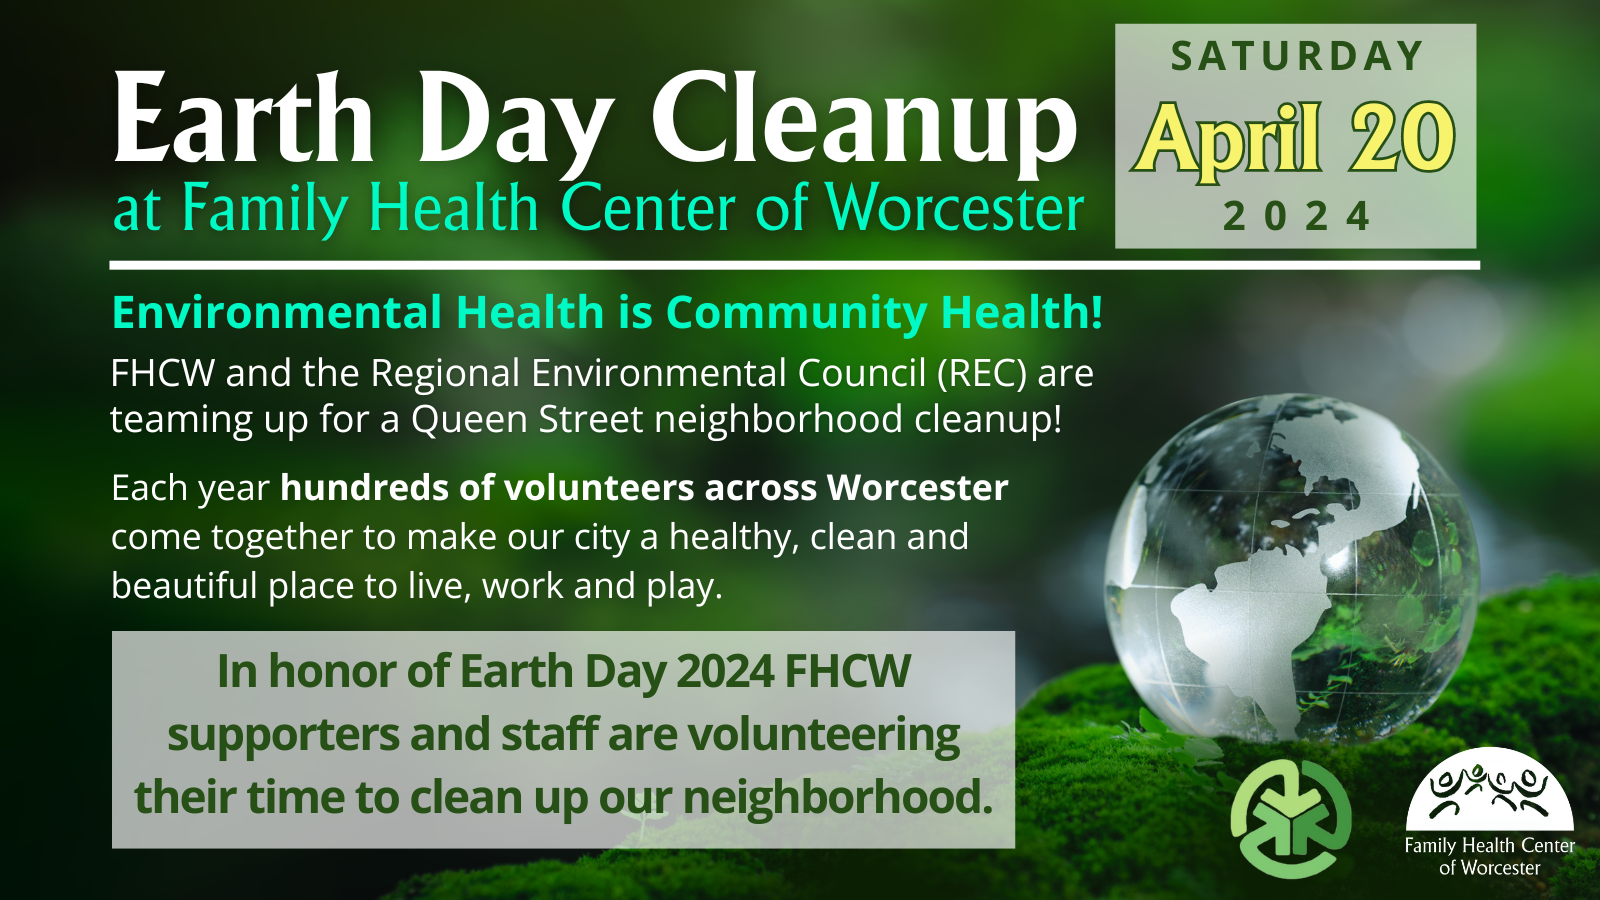 Family Health Center of Worcester and the Regional Environmental Council for a day of community service and environmental stewardship at the Earth Day Neighborhood Clean Up. On April 20th, starting at 9am